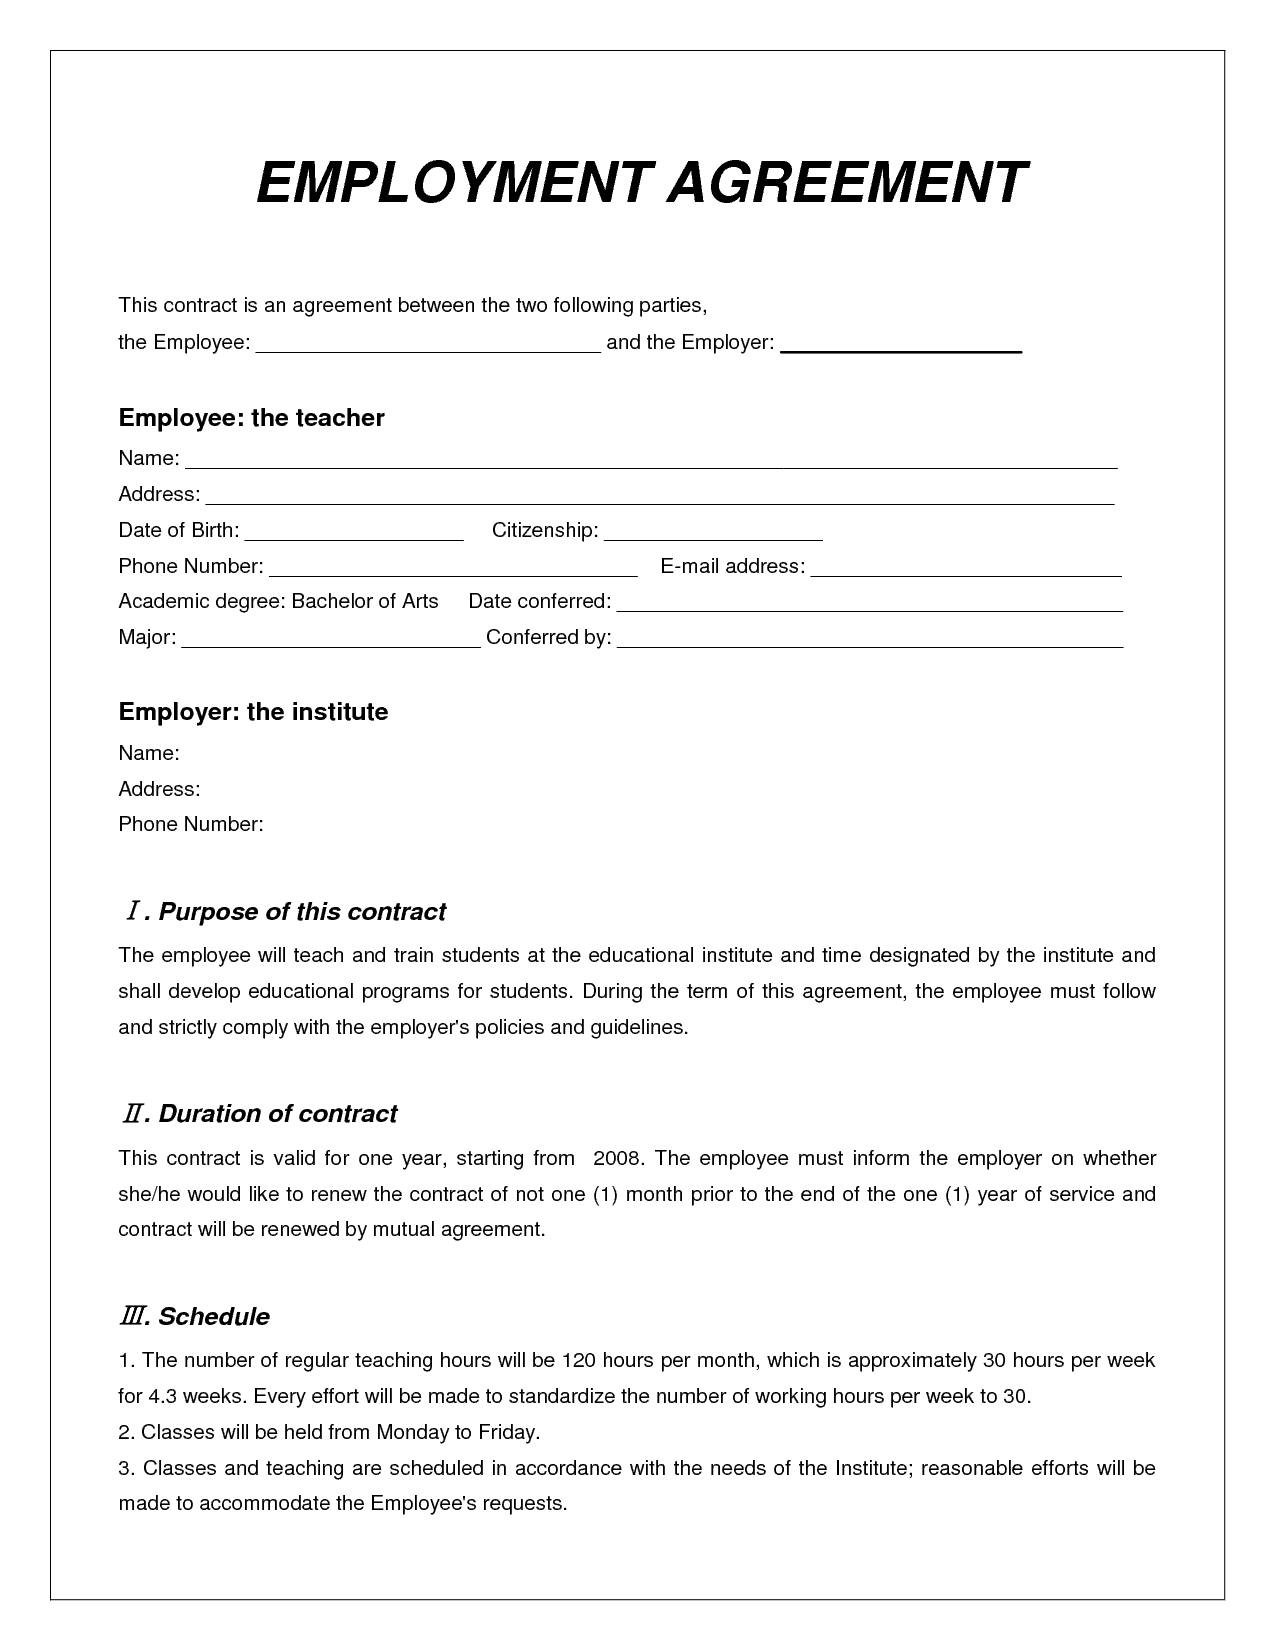 top-5-free-employment-agreement-templates-word-excel-templates